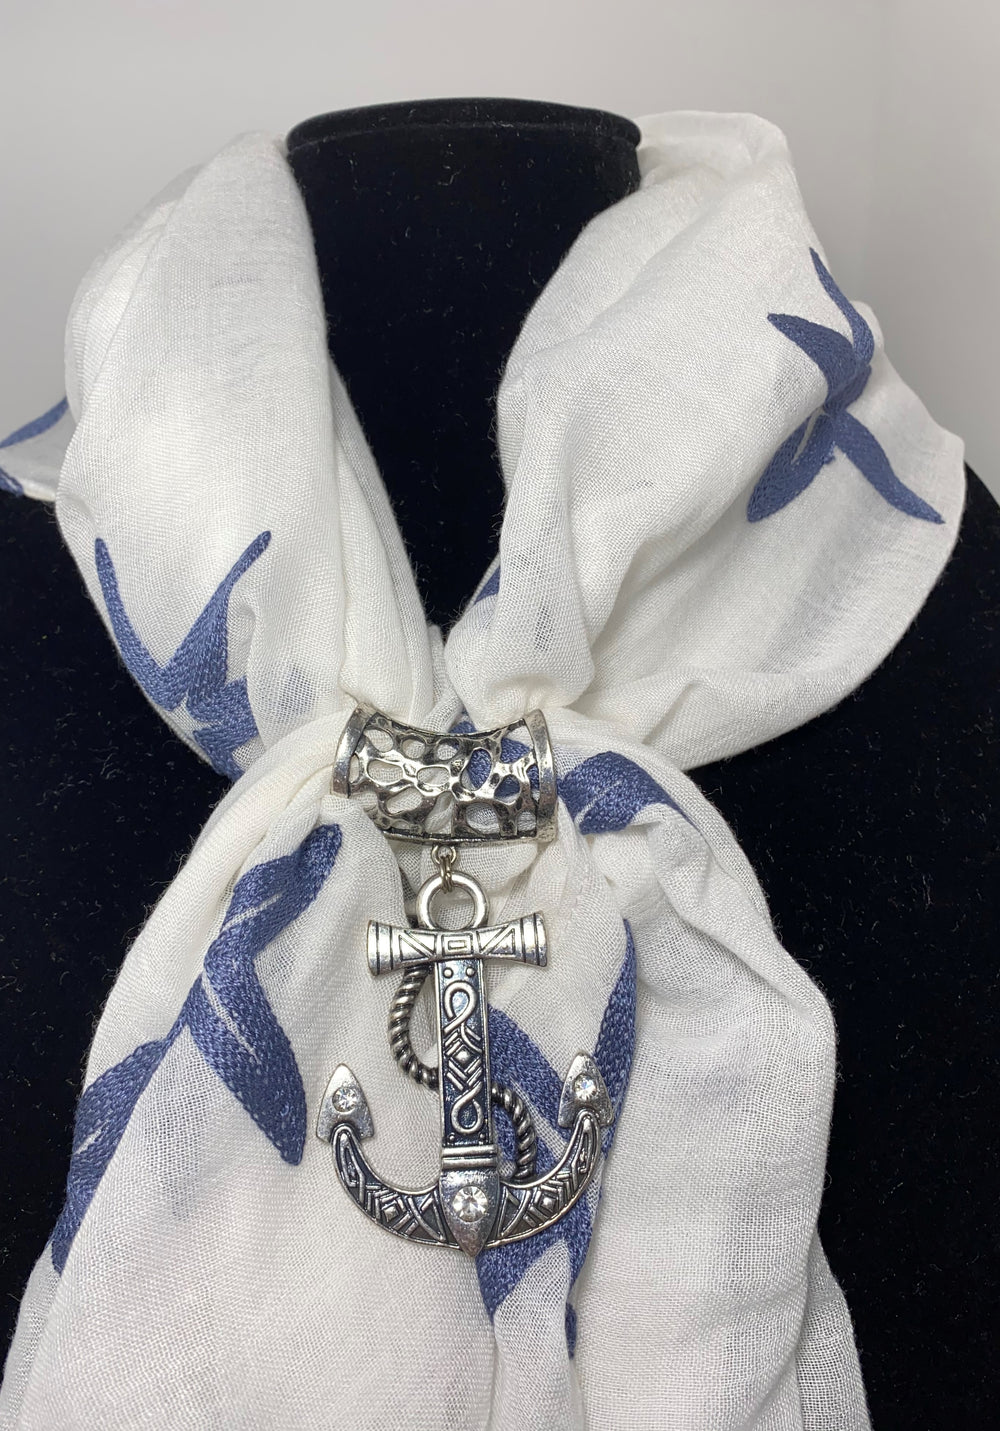 Blue Star Fish embroidered on White Scarf (Clasp Sold Separately)